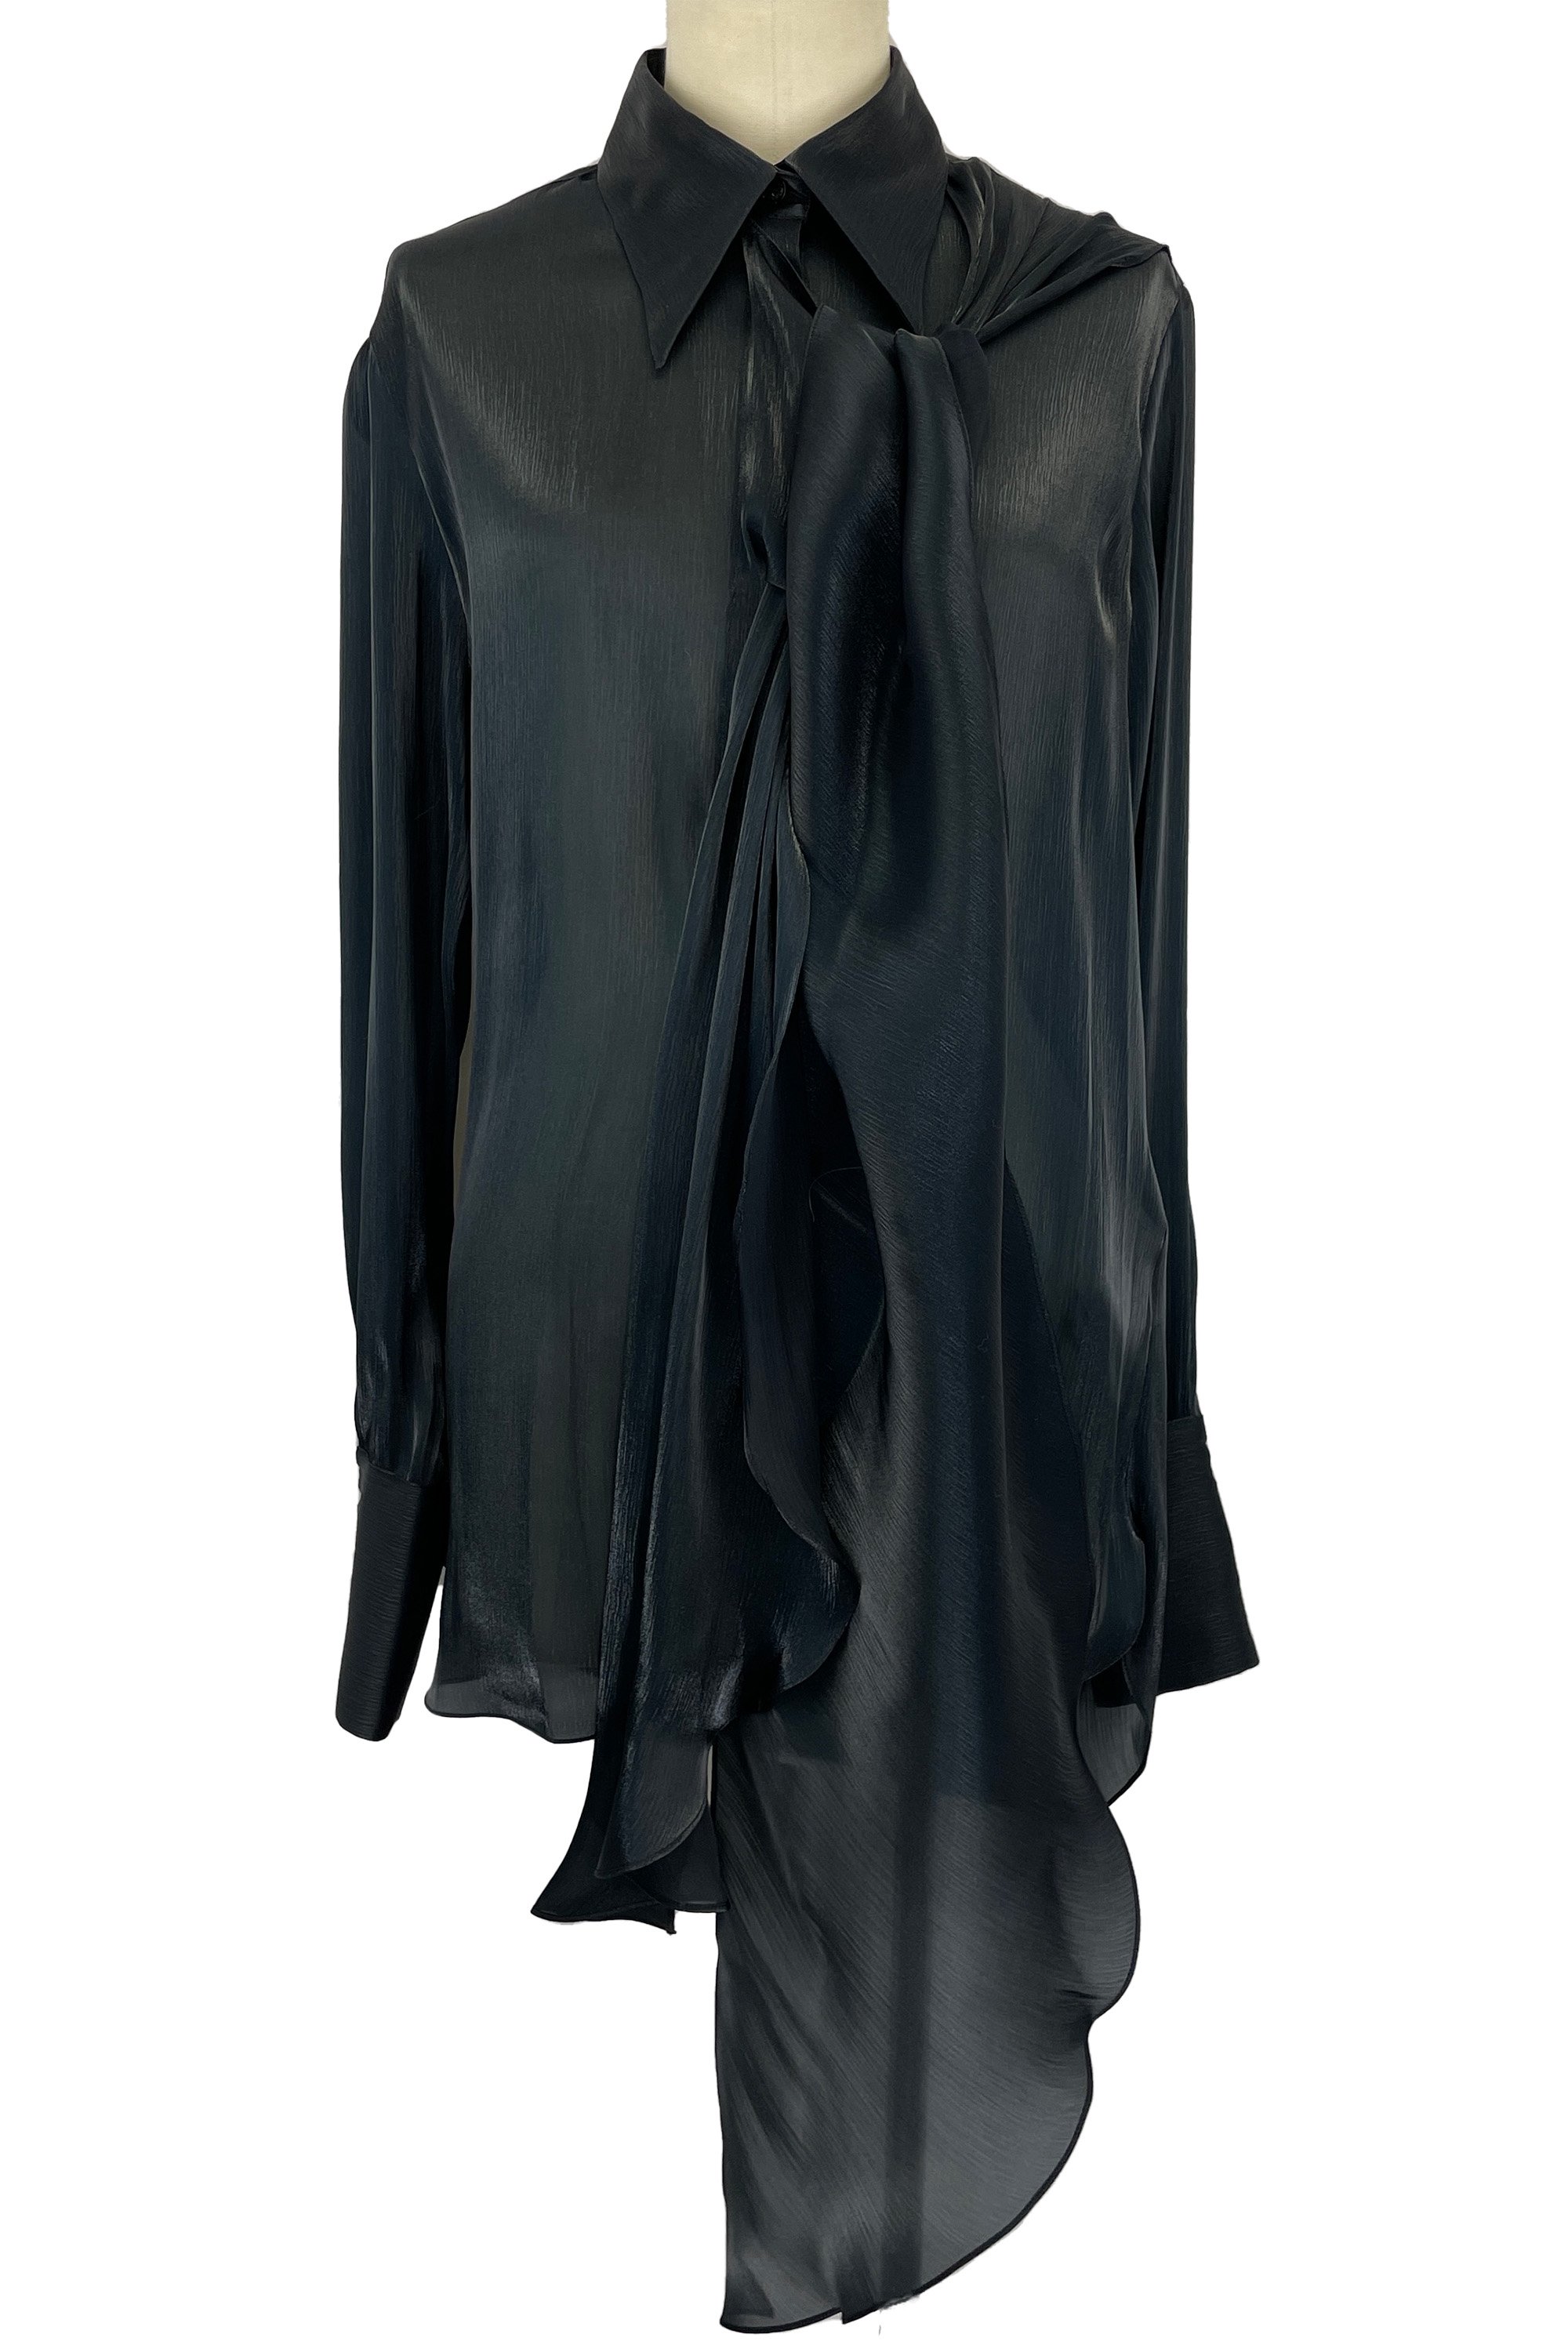 <img class='new_mark_img1' src='https://img.shop-pro.jp/img/new/icons21.gif' style='border:none;display:inline;margin:0px;padding:0px;width:auto;' />【30%OFF】VICTORIA BECKHAM Scarf blouse